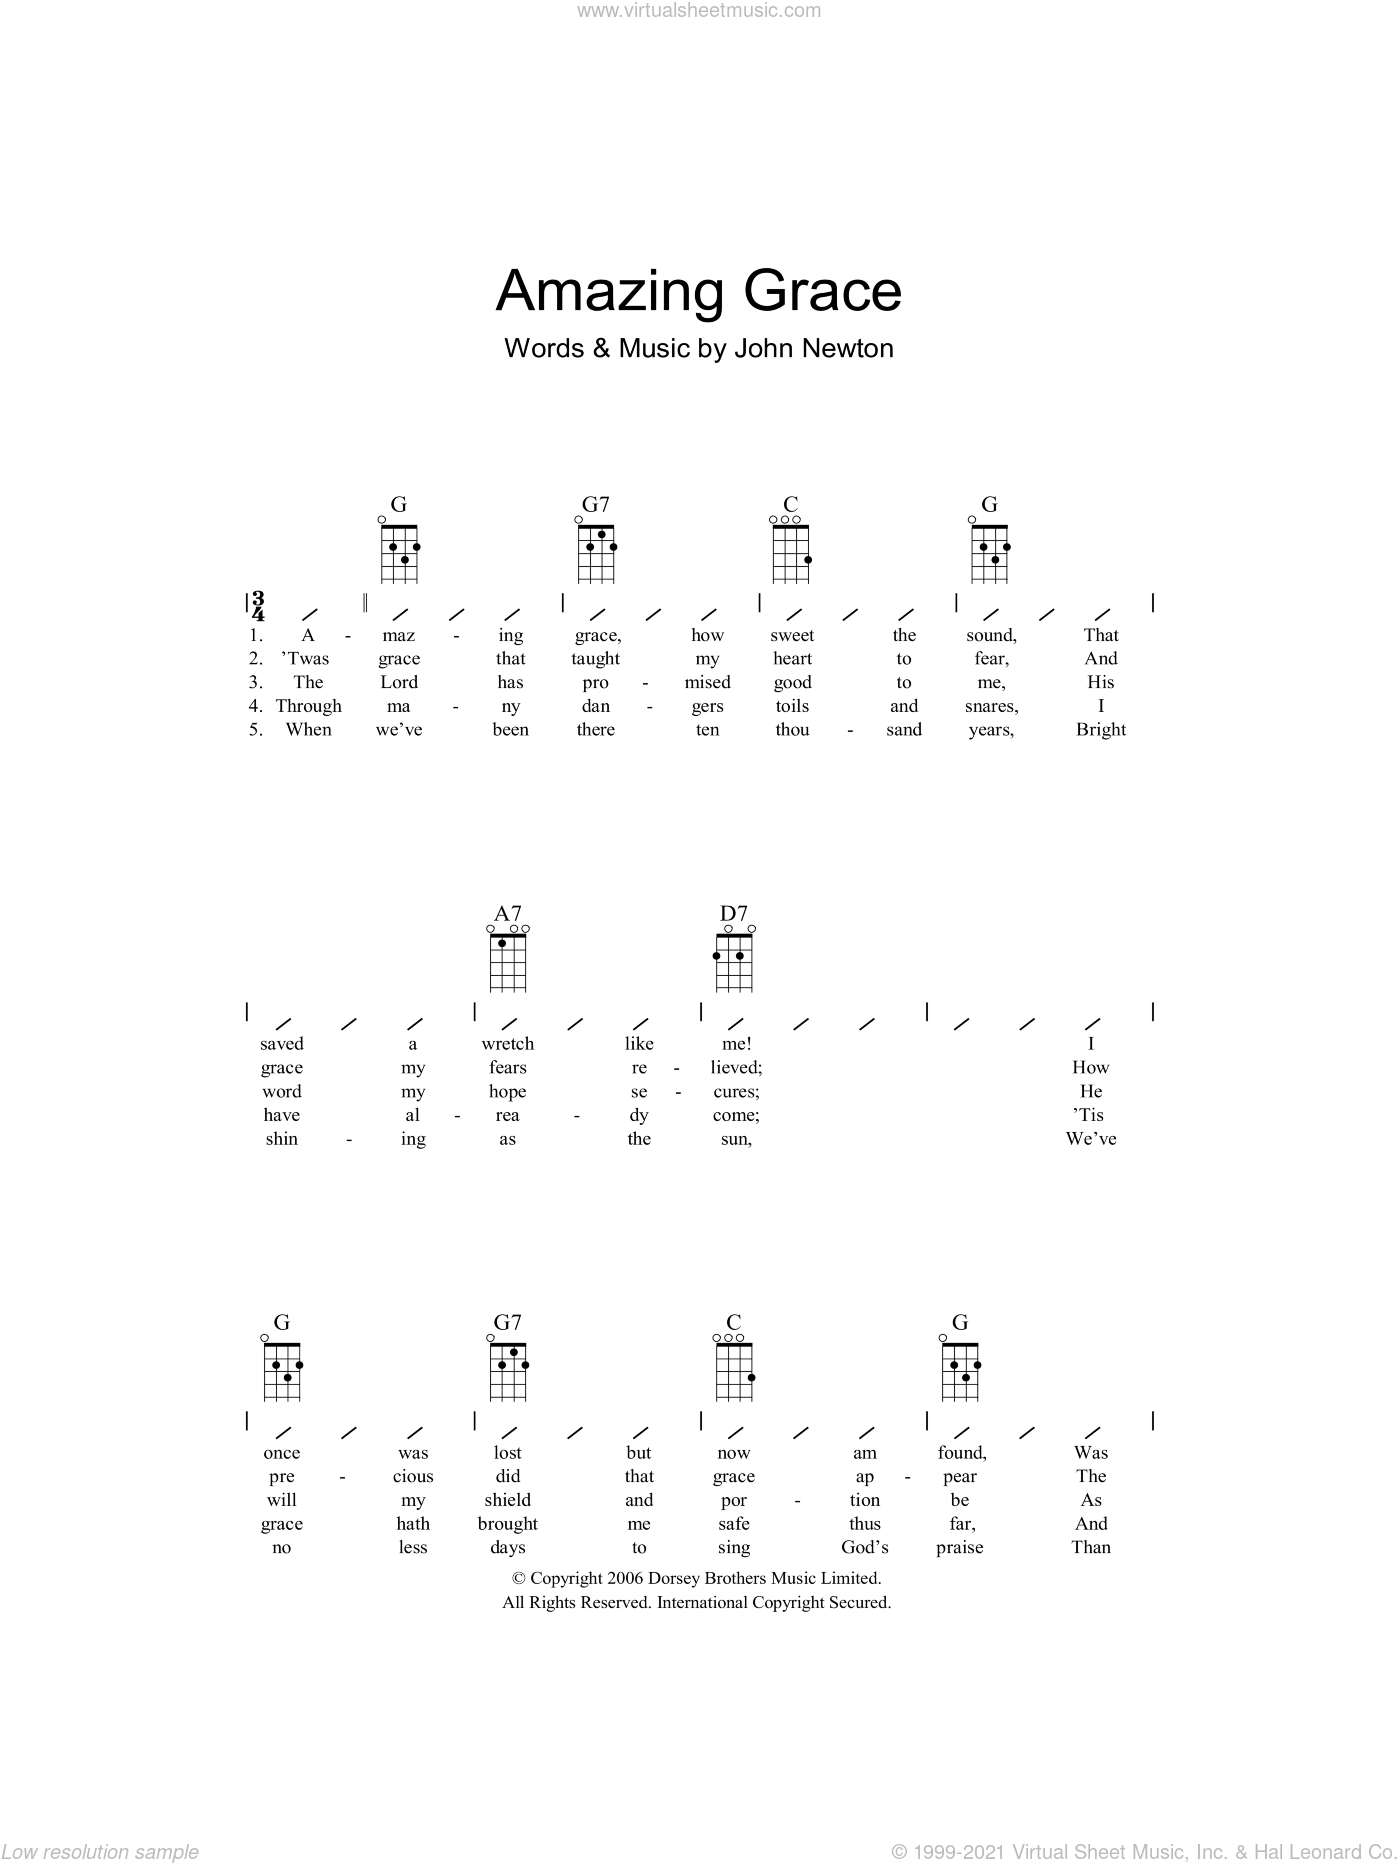 This is amazing grace chords